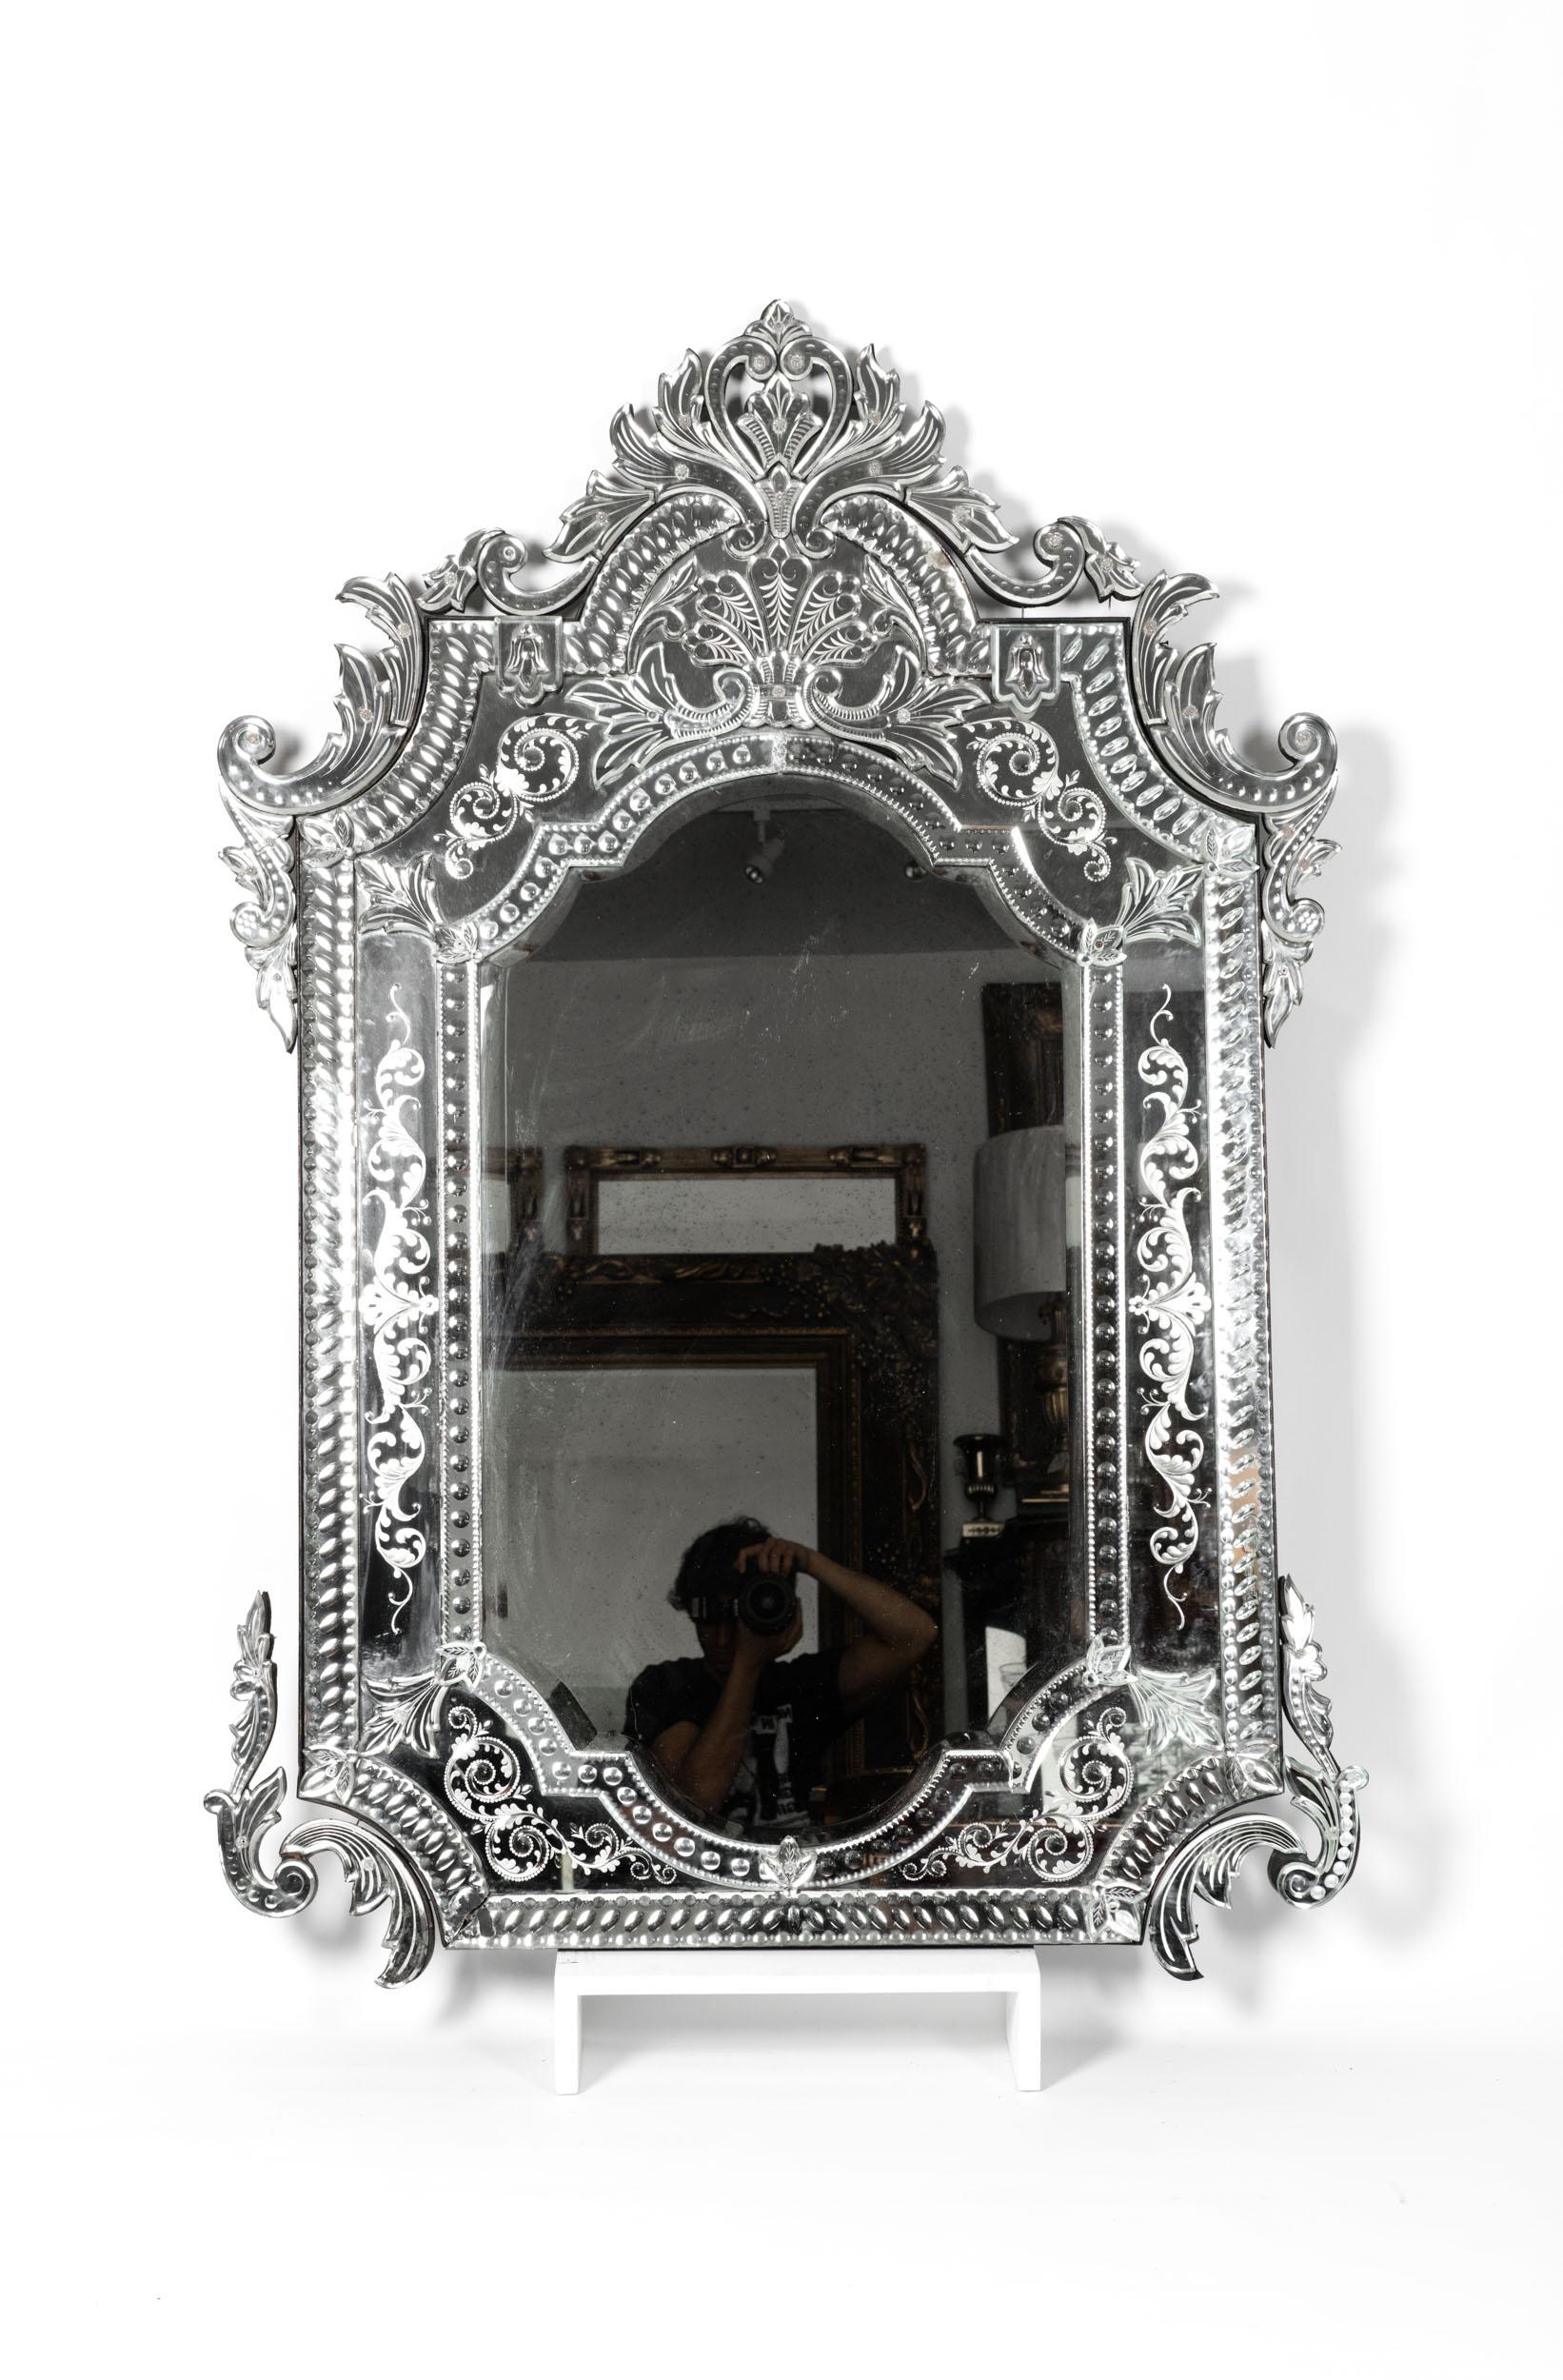 Large rectangle etched glass framed Venetian fire mantel hanging wall mirror. Topped with intricate openwork pediment. Excellent antique condition. Minor losses and wear consistent with age or use. The hanging mirror measure about 60 inches length X